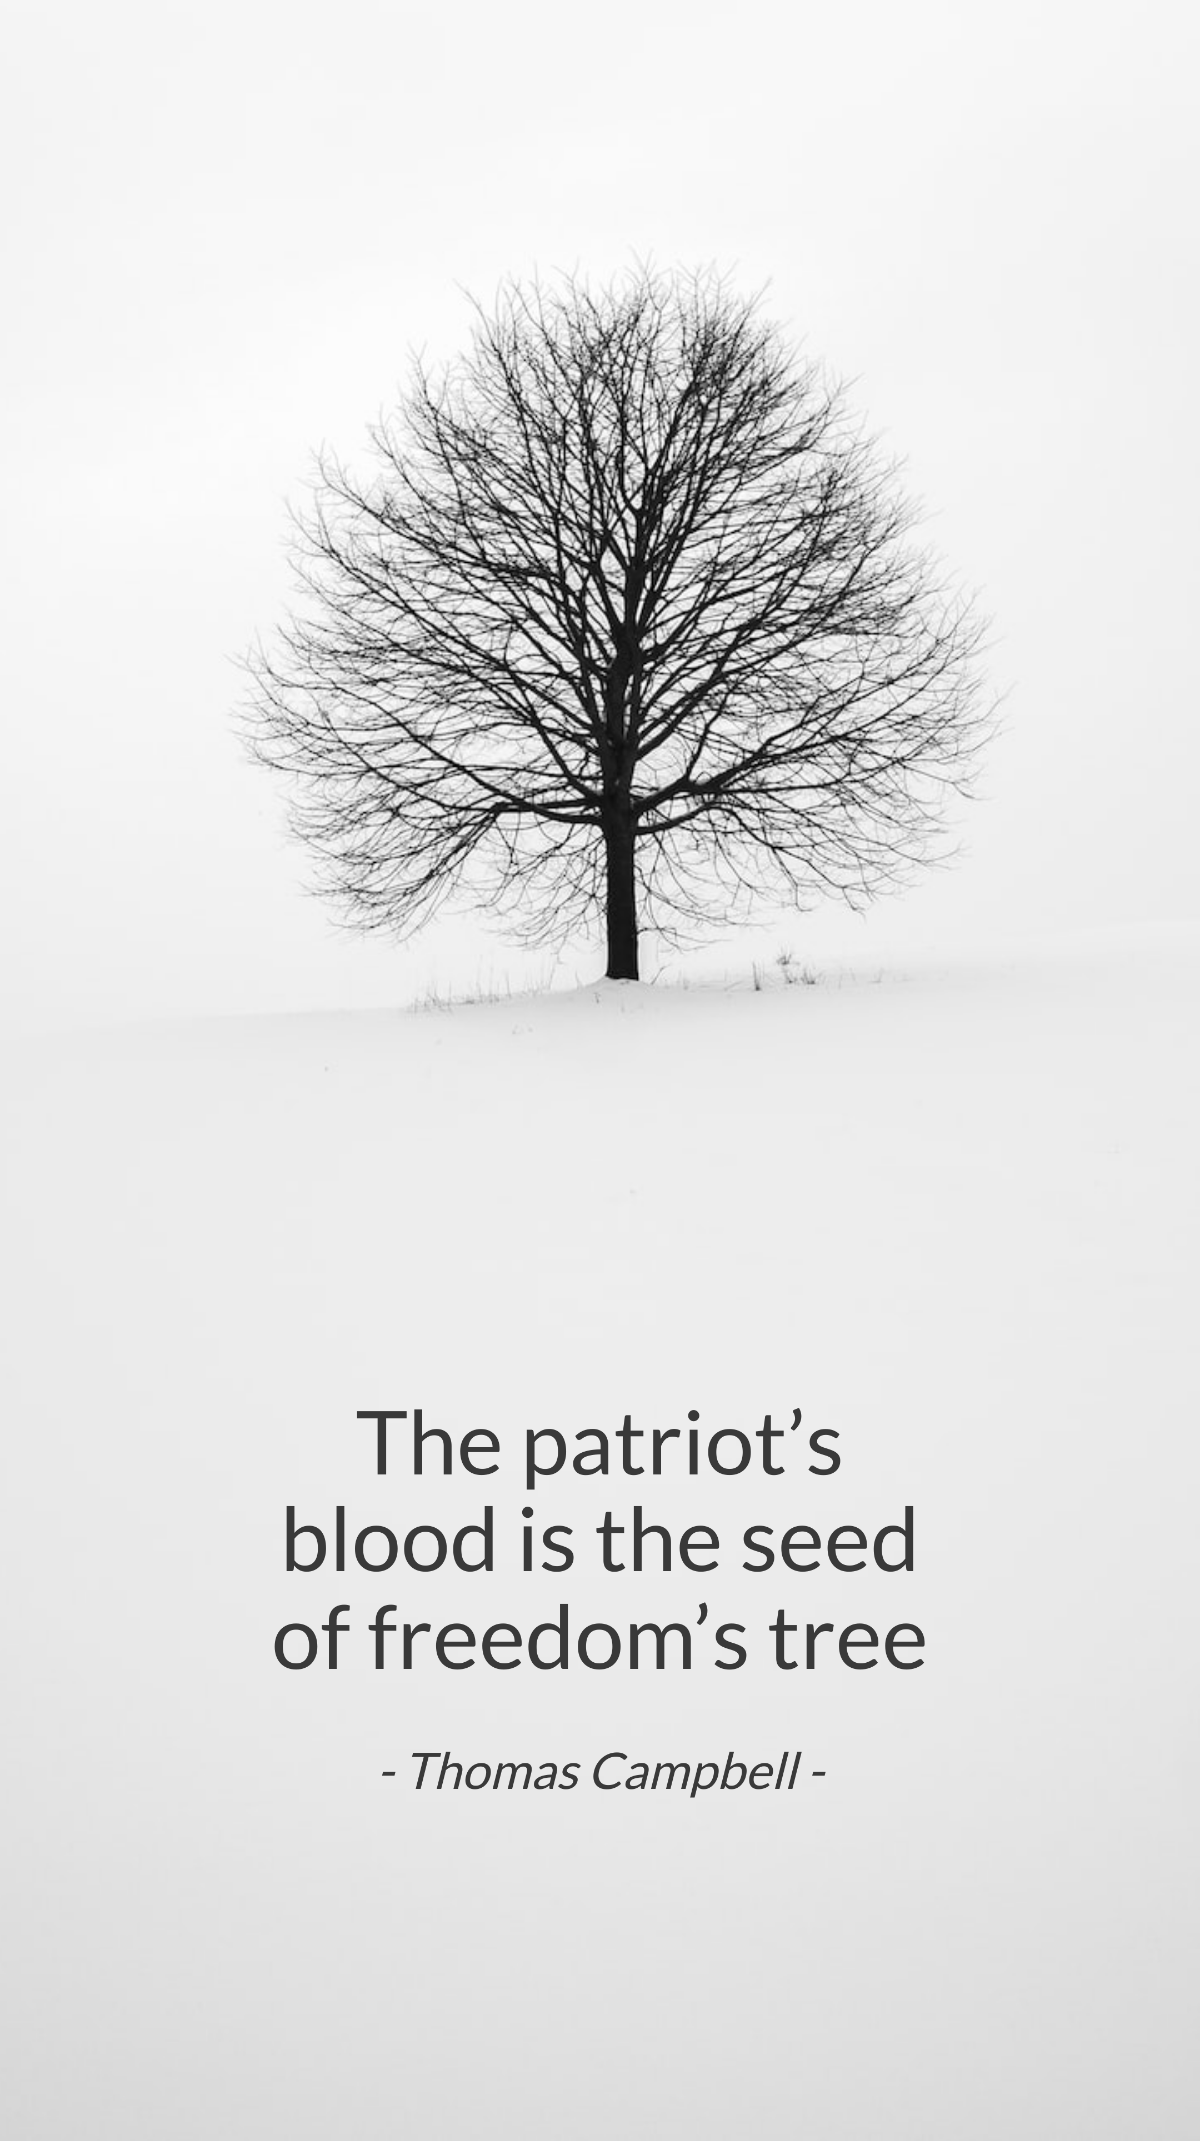 Thomas Campbell - "The patriot’s blood is the seed of freedom’s tree."